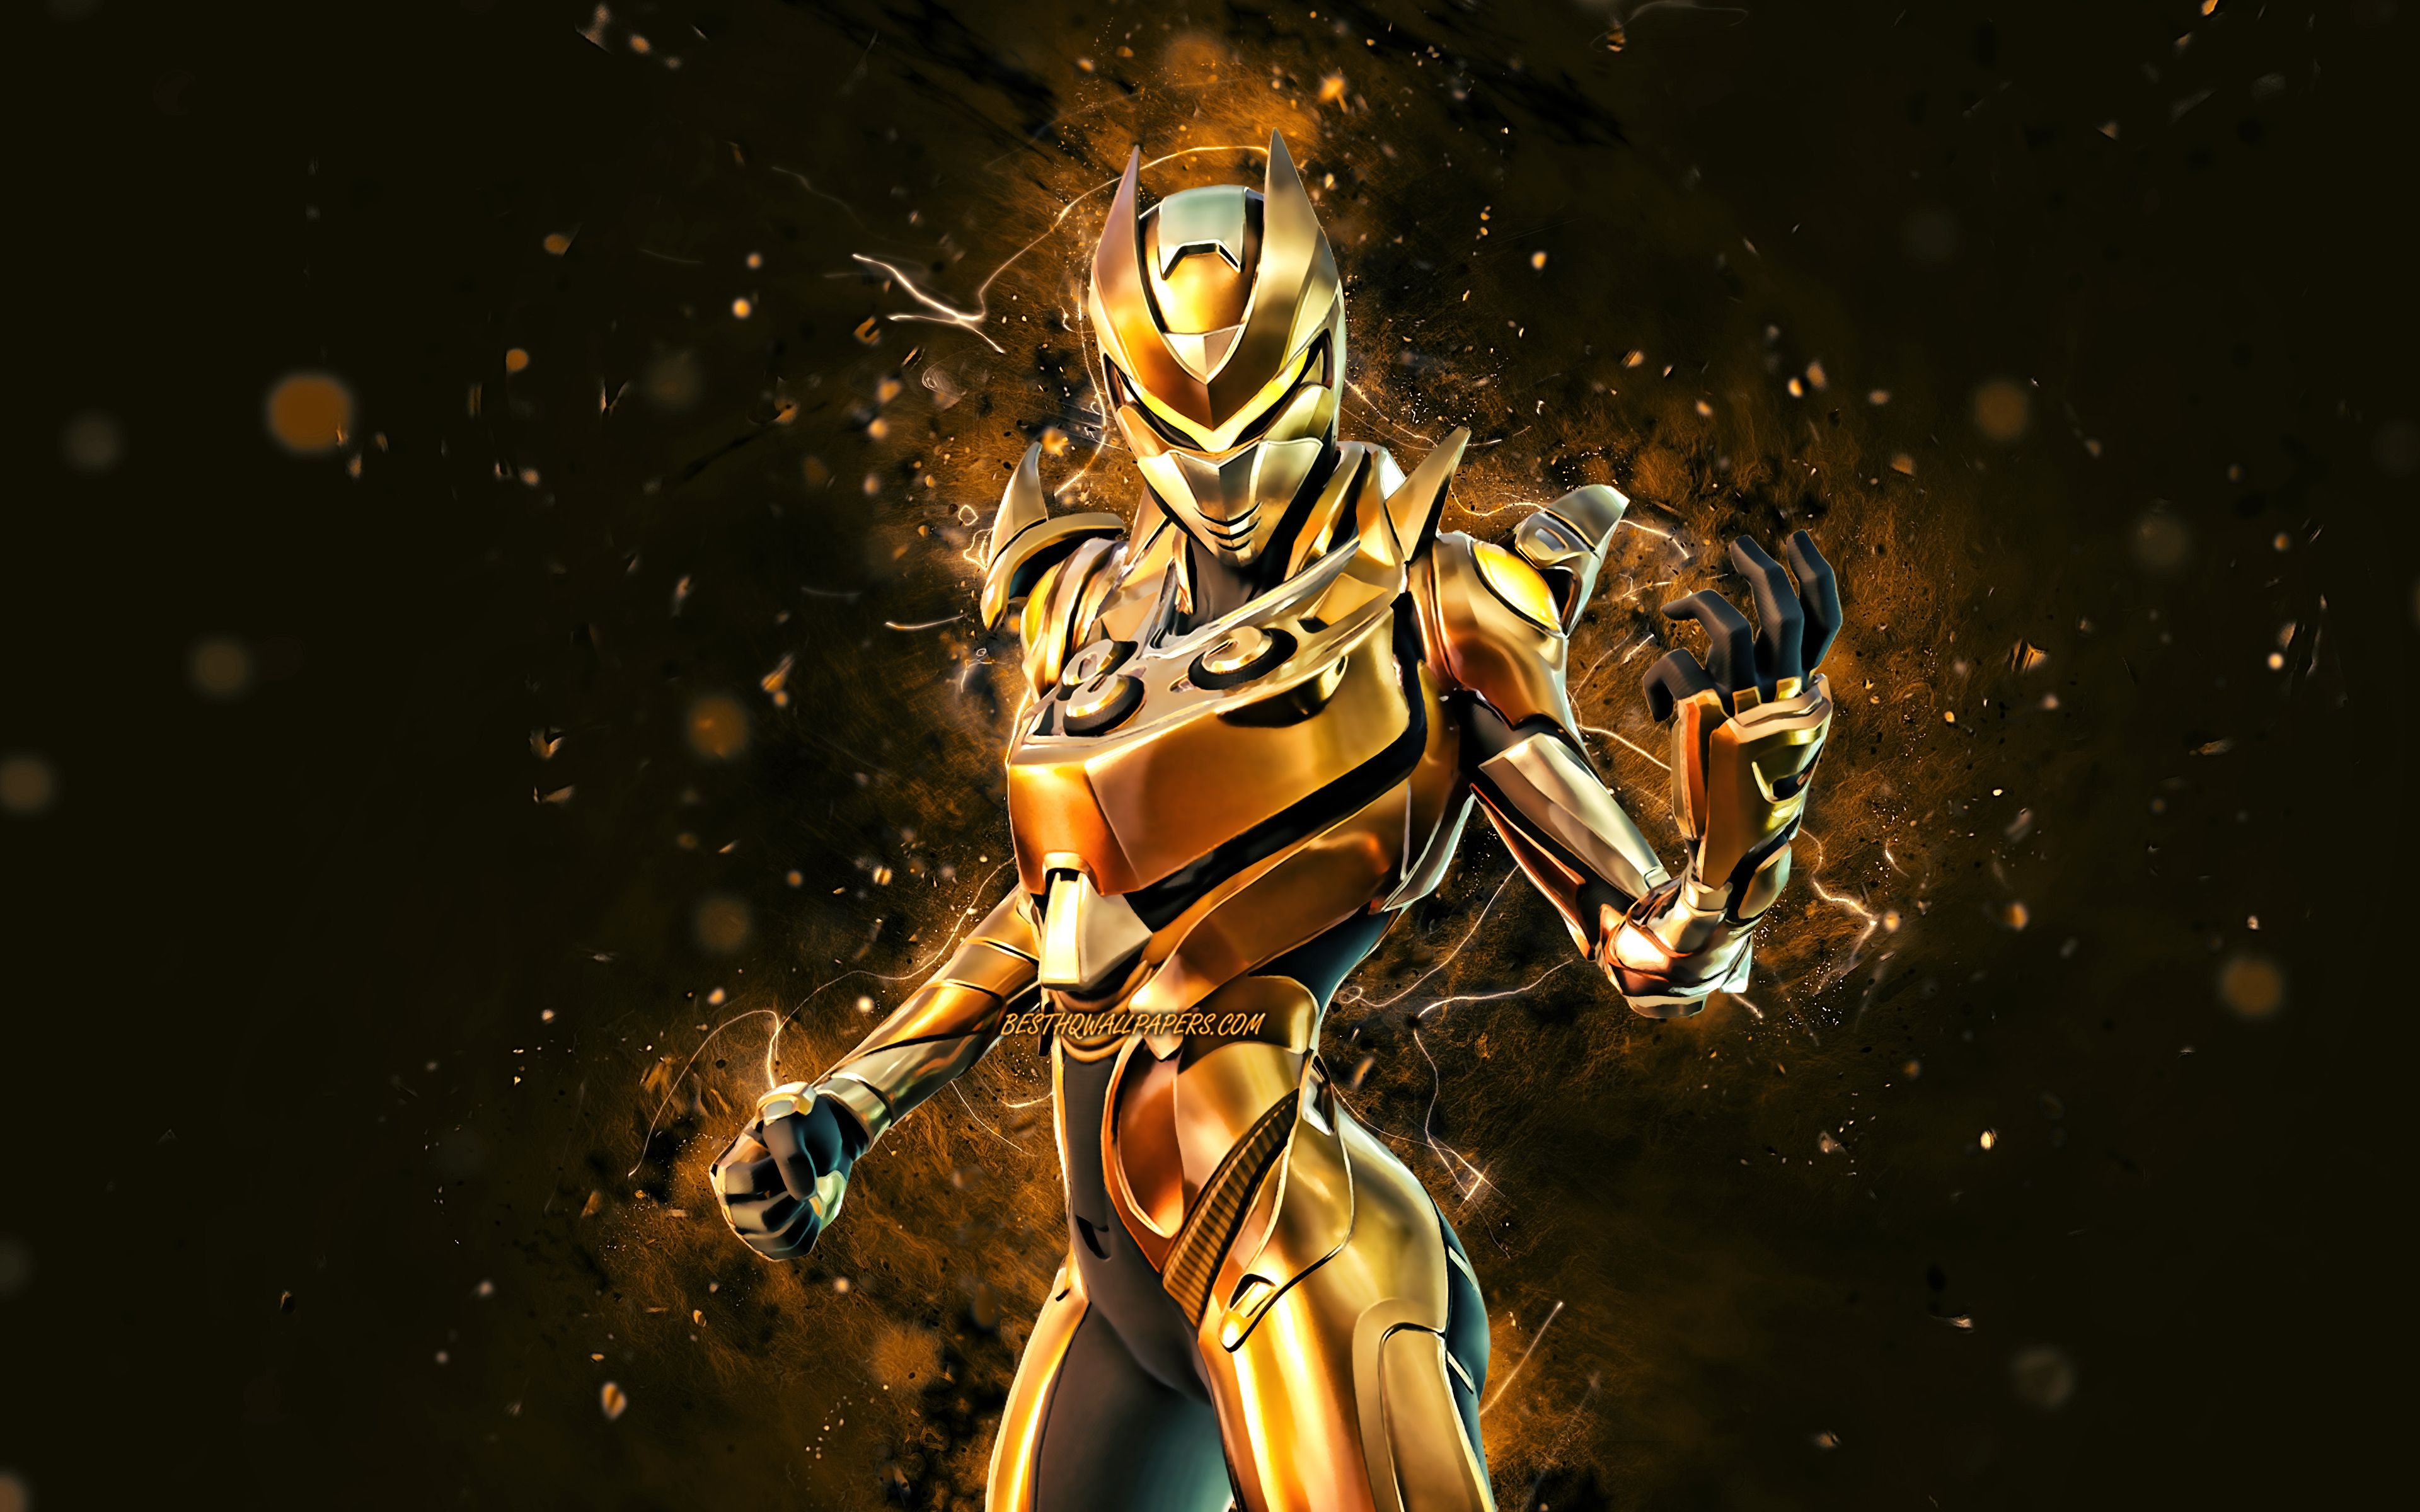 Download wallpaper Gold Oblivion, 4k, yellow neon lights, Fortnite Battle Royale, Fortnite characters, Gold Oblivion Skin, Fortnite, Gold Oblivion Fortnite for desktop with resolution 3840x2400. High Quality HD picture wallpaper